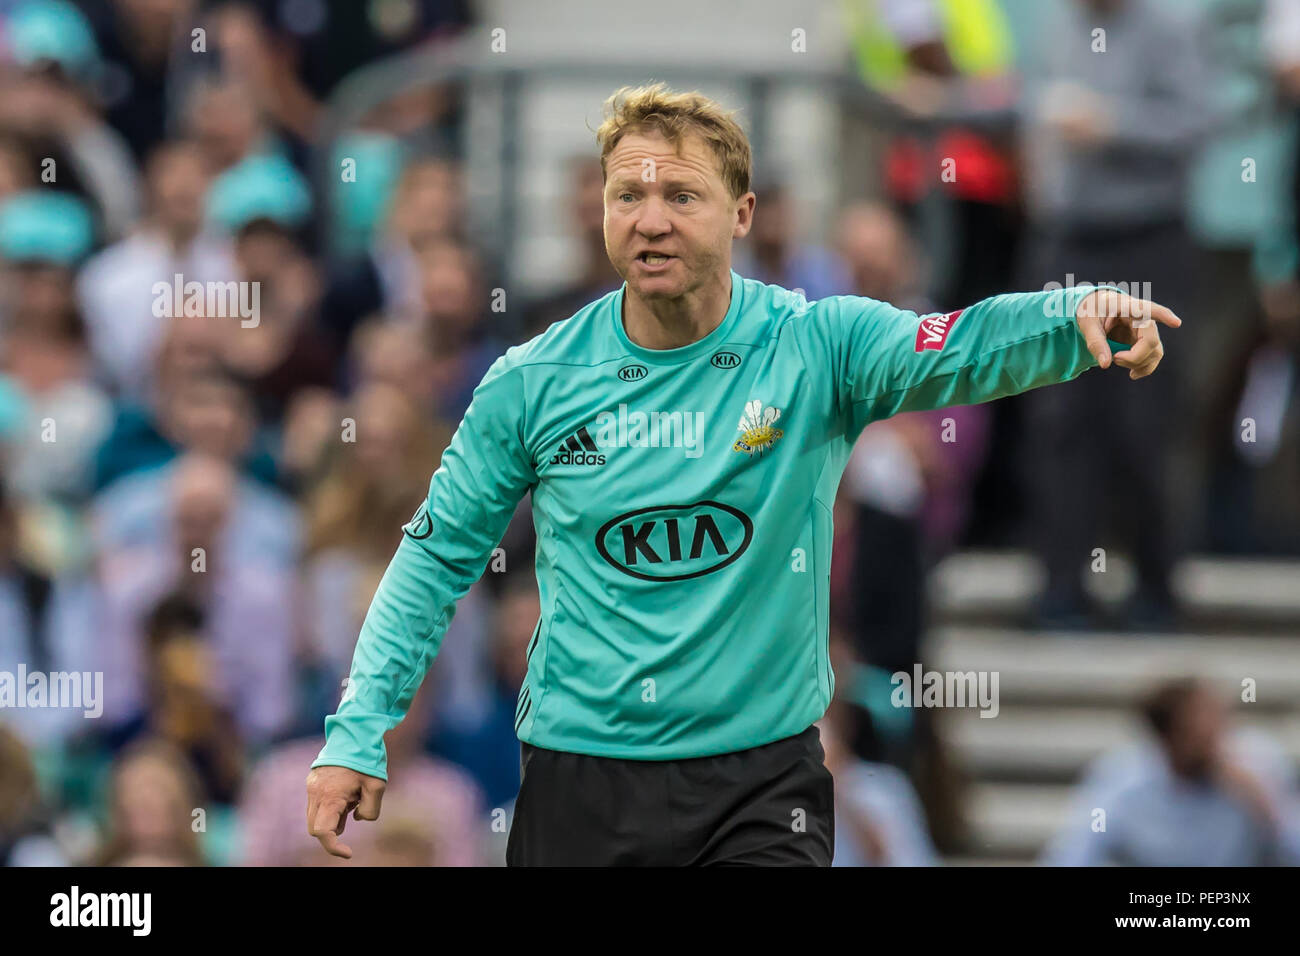 London, UK. 15 August, 2018. Gareth Batty fielding for Surrey against Hampshire in the Vitality T20 Blast match at the Kia Oval. David Rowe/Alamy Live News Stock Photo